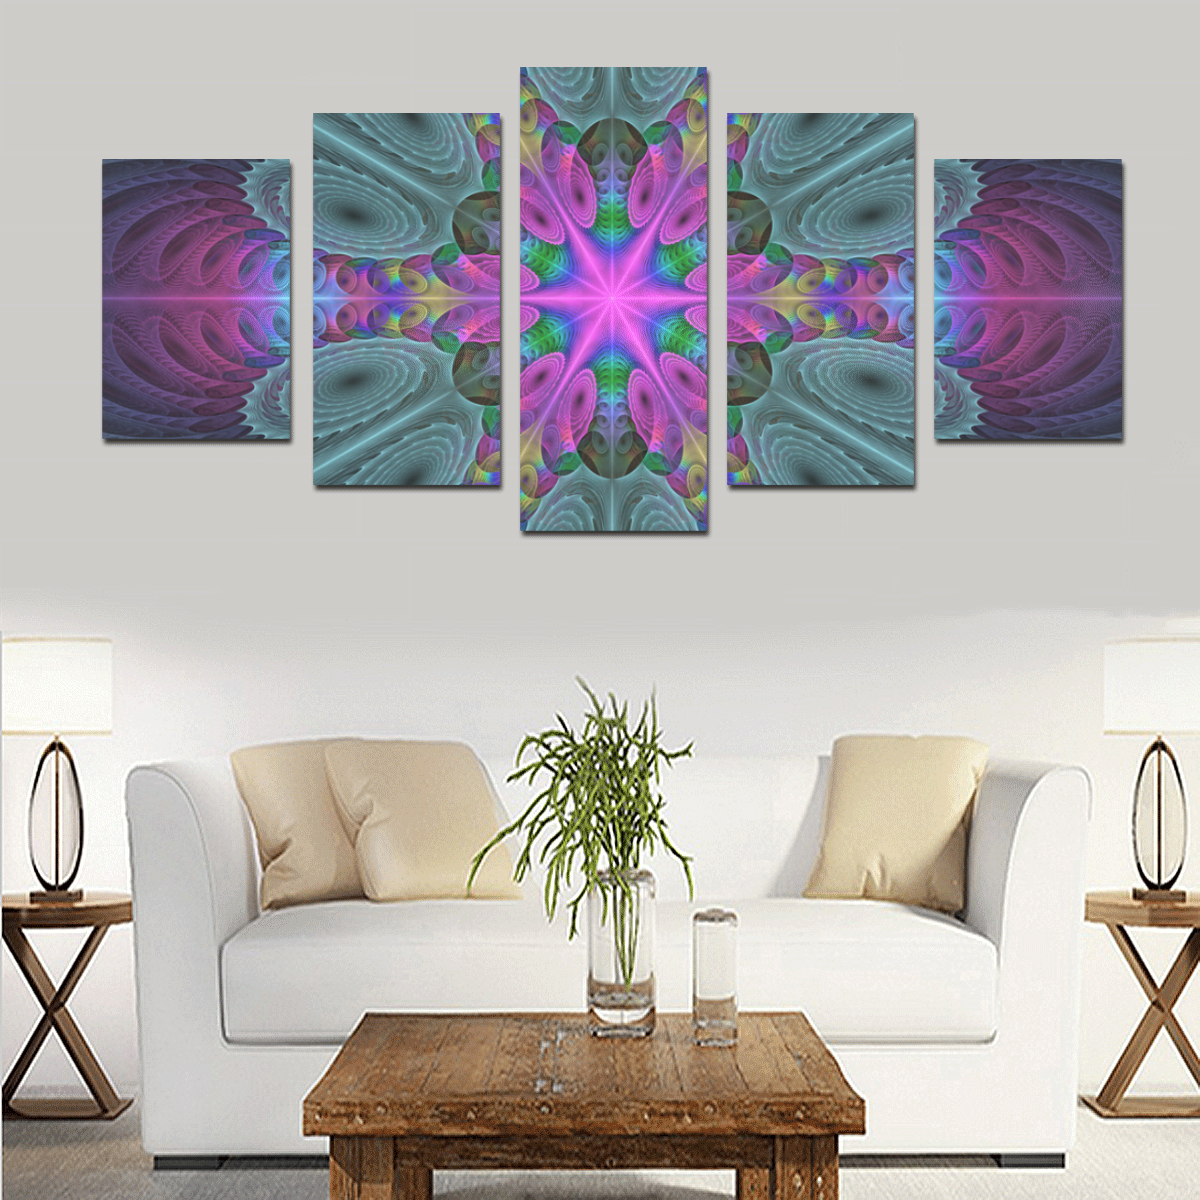 Mandala From Center Colorful Fractal Art With Pink Canvas Print Sets D (No Frame)